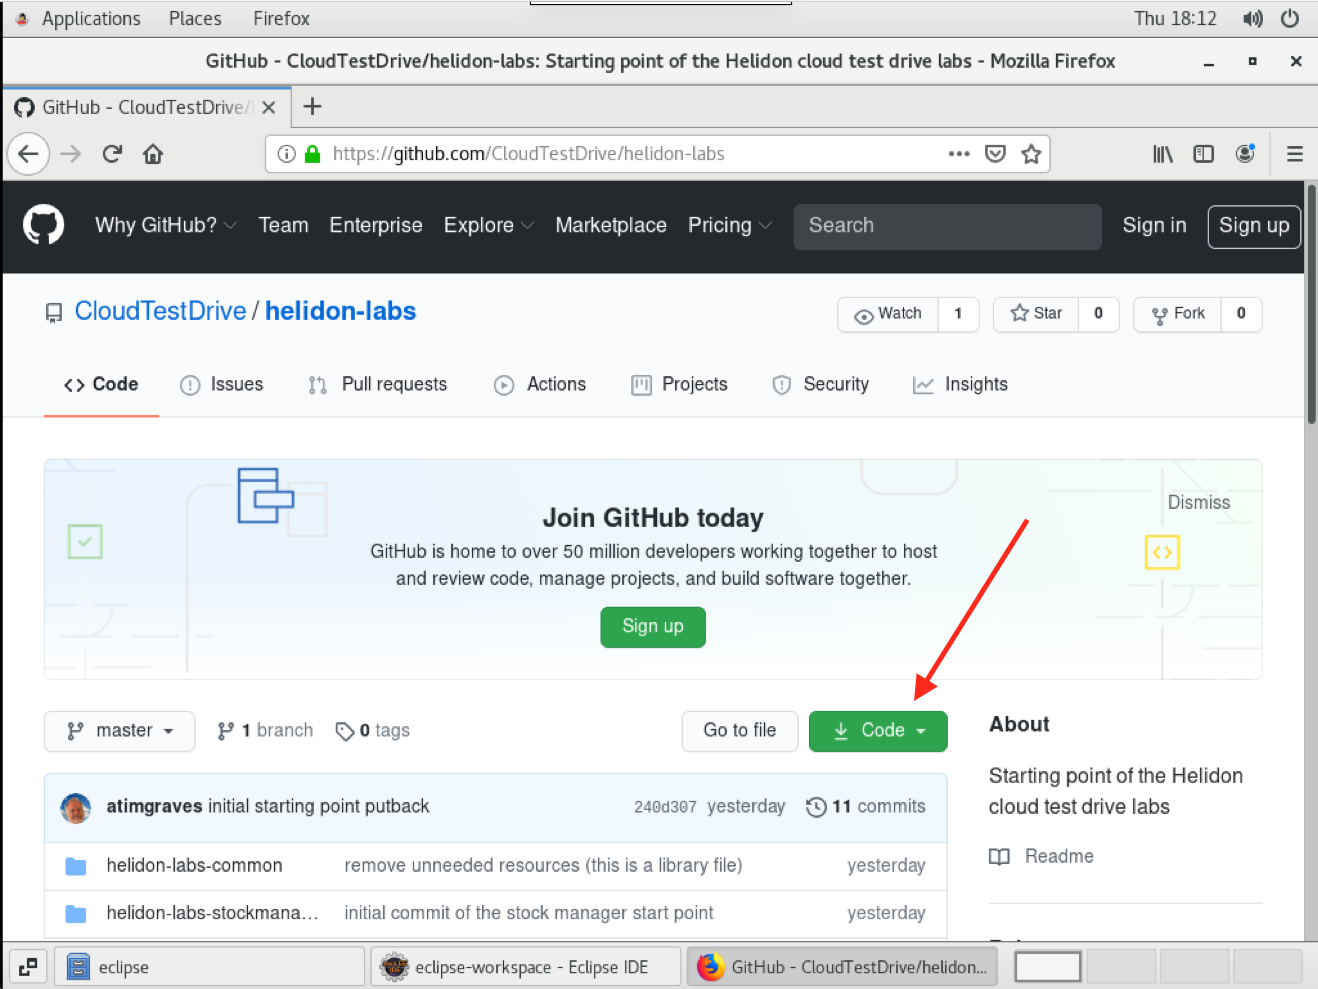 Accessing the code in github